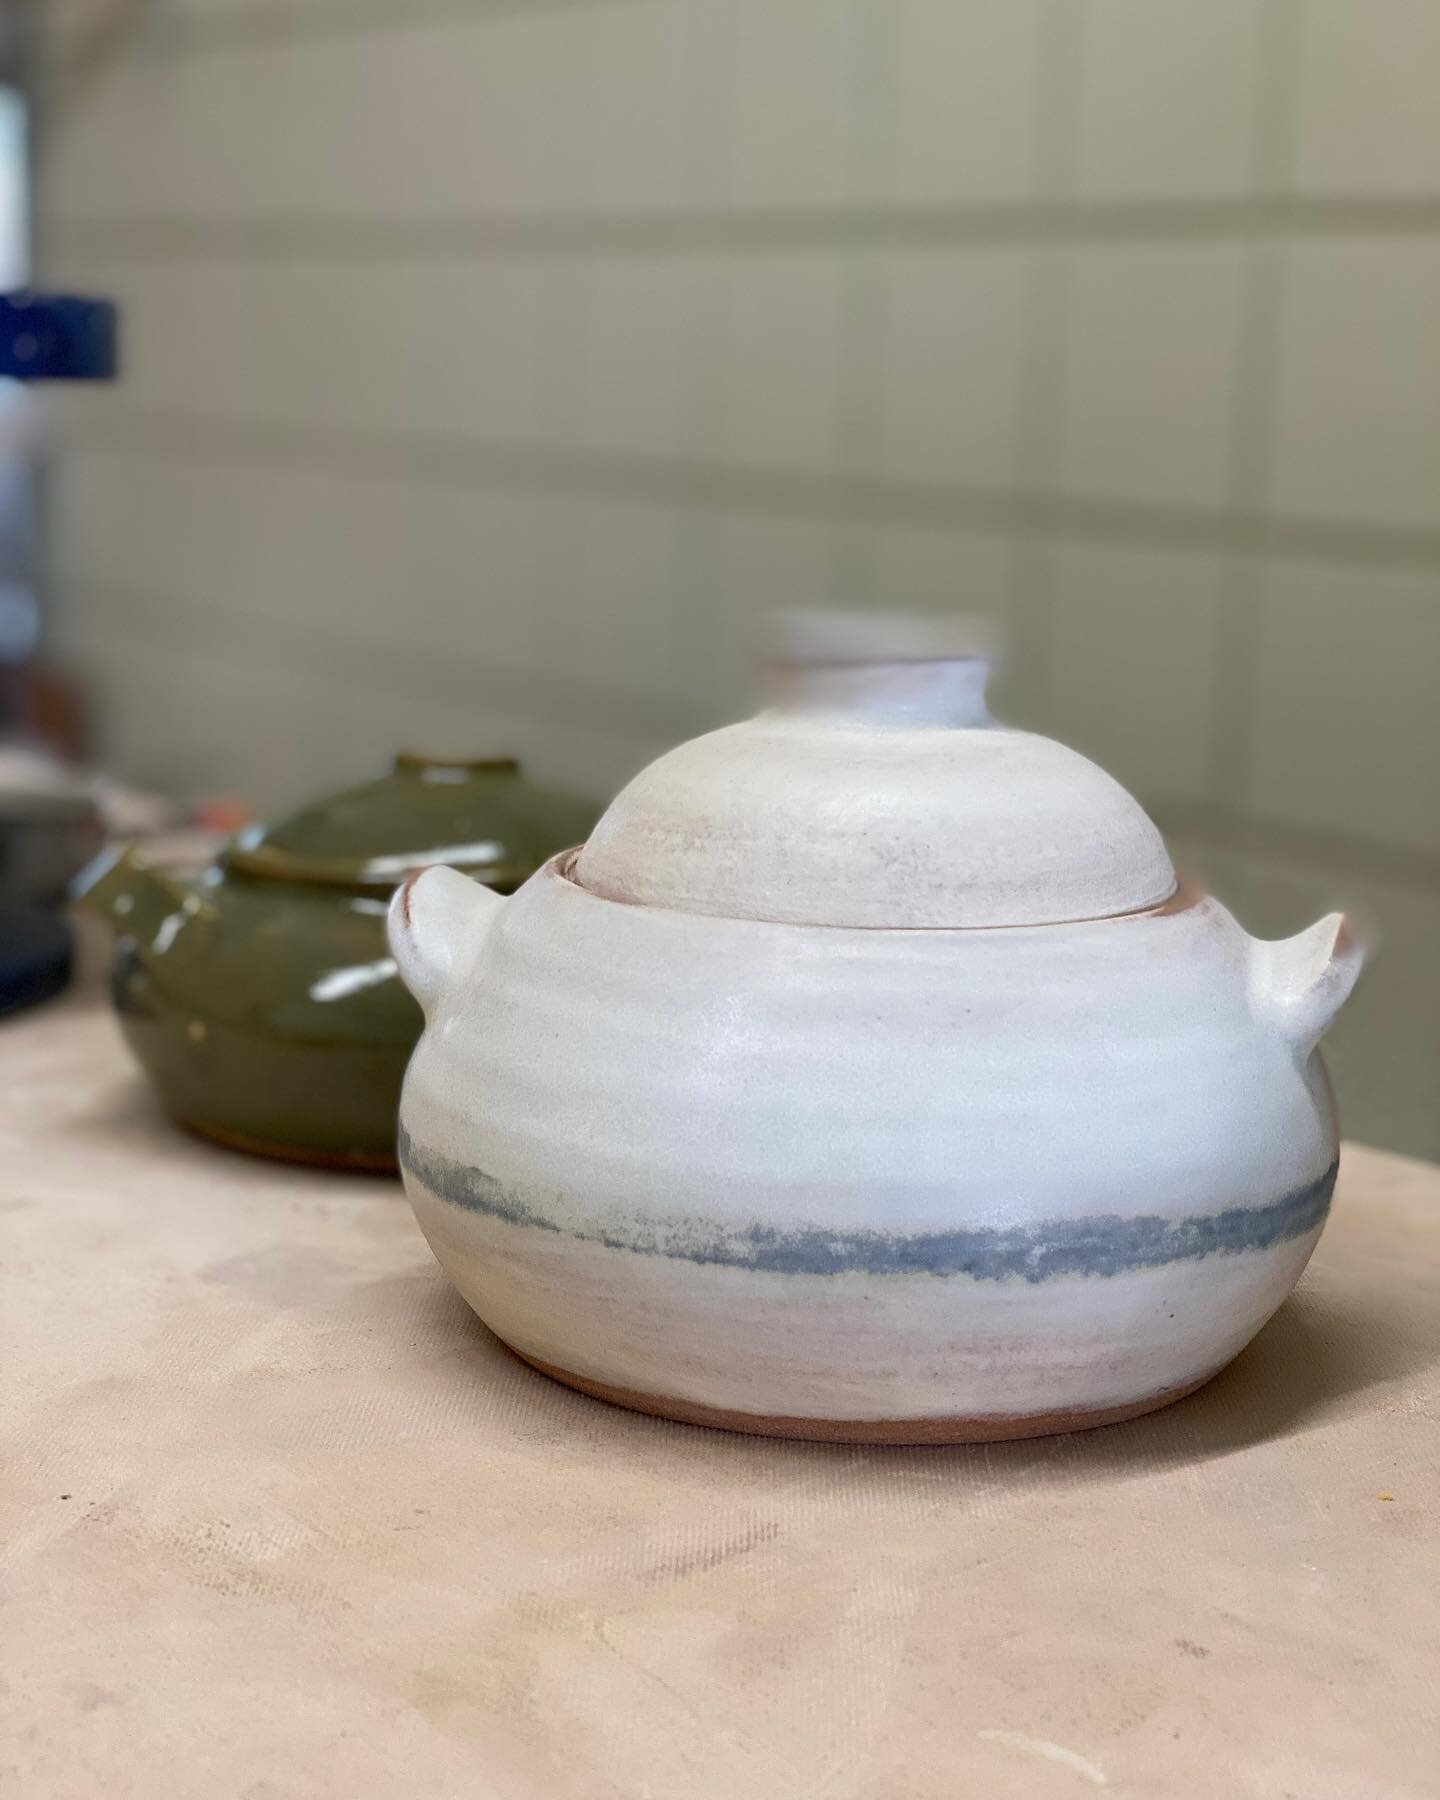 Made two clay pots for a friend. I love that people can use them and my works can be part of their life. ☺️

#claypots #handbuiltceramics #handmadeart #pottery #gift #handmadegifts #sandiegoart #ceramics #mingei #funtionalwear